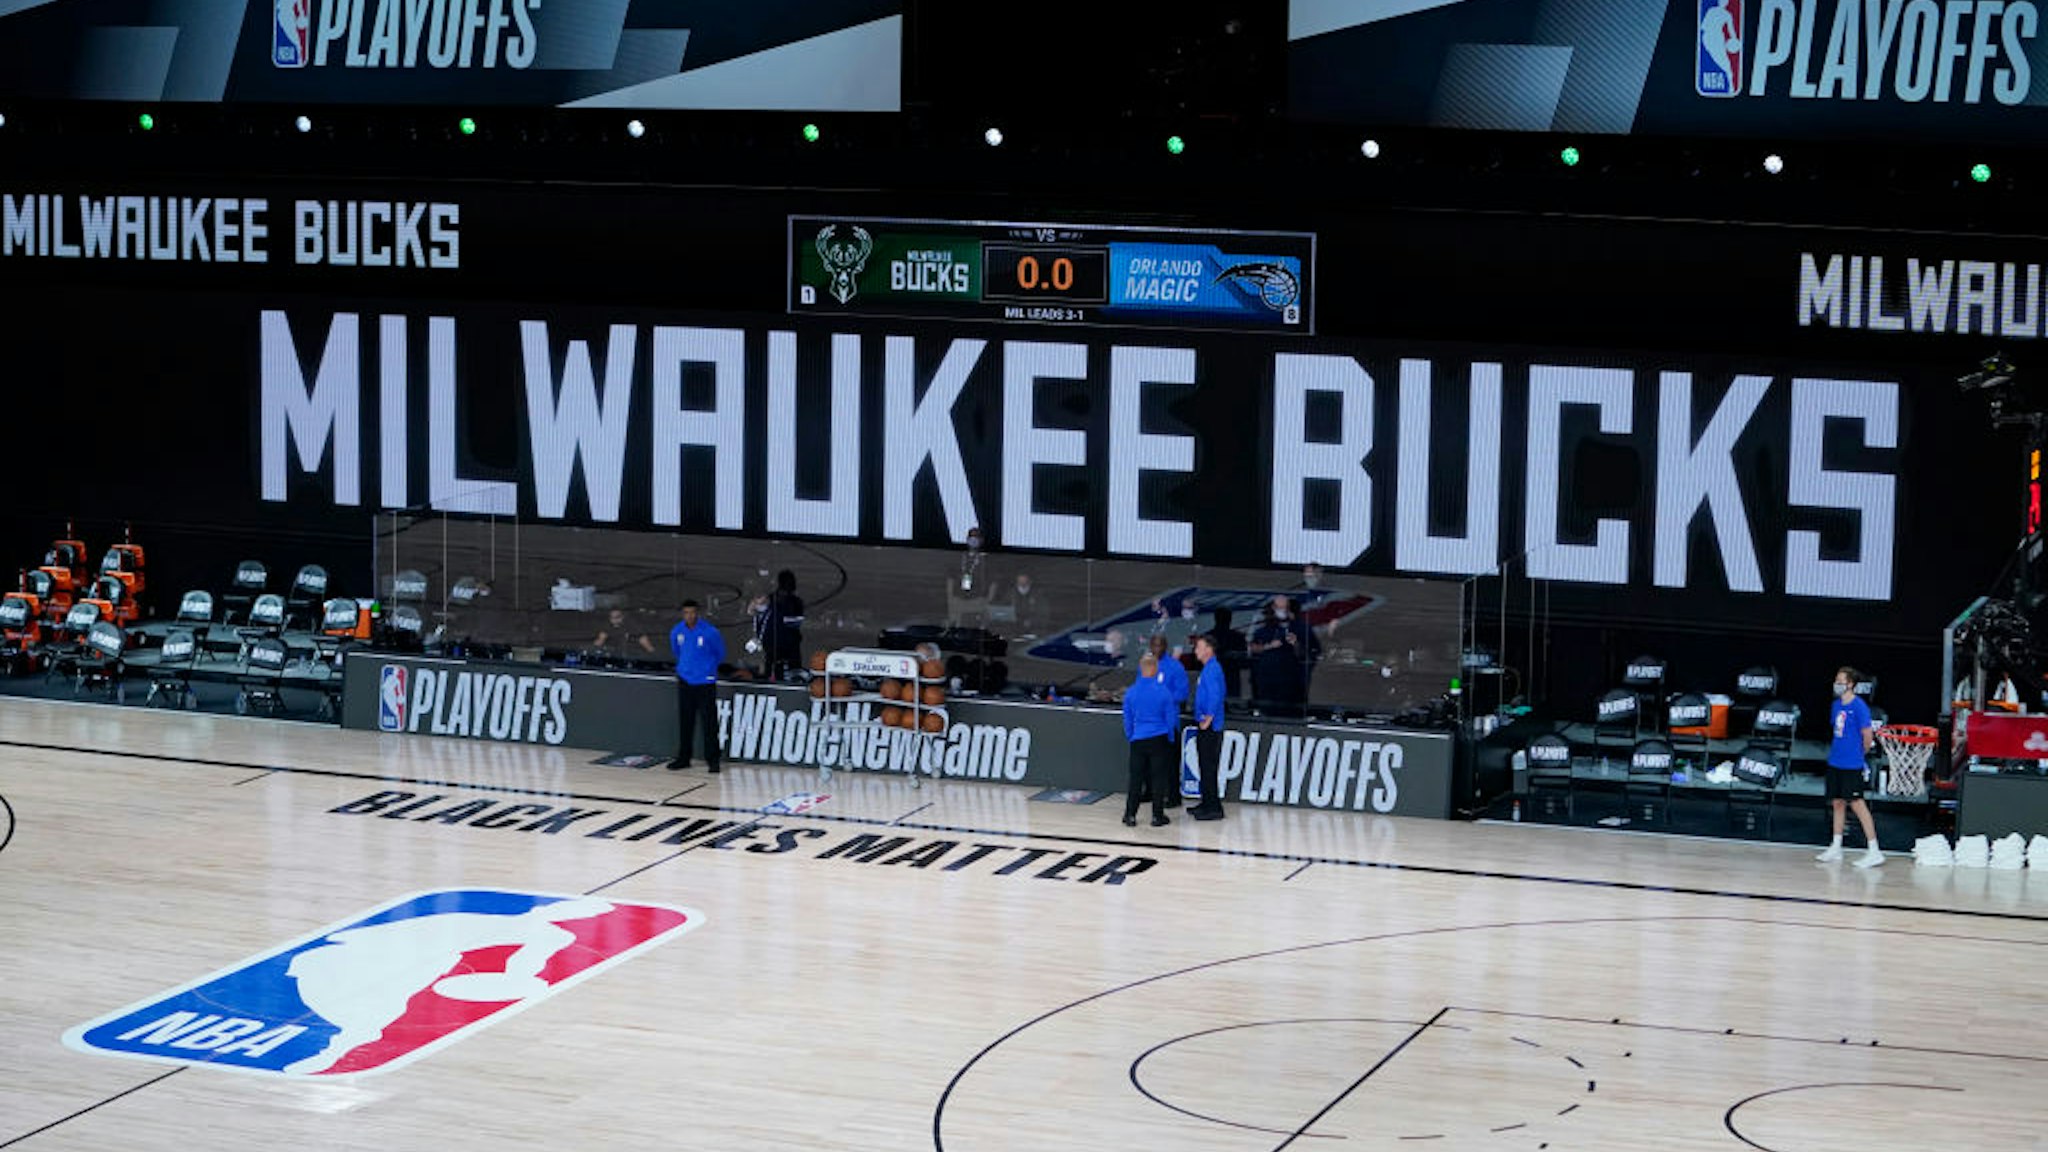 LAKE BUENA VISTA, FLORIDA - AUGUST 26: Officials stand beside an empty court after the scheduled start of game five between the Milwaukee Bucks and the Orlando Magic in the first round of the 2020 NBA Playoffs at AdventHealth Arena at ESPN Wide World Of Sports Complex on August 26, 2020 in Lake Buena Vista, Florida. According to reports, the Milwaukee Bucks have boycotted their game 5 playoff game against the Orlando Magic to protest the shooting of Jacob Blake by Kenosha, Wisconsin police. NOTE TO USER: User expressly acknowledges and agrees that, by downloading and or using this photograph, User is consenting to the terms and conditions of the Getty Images License Agreement.